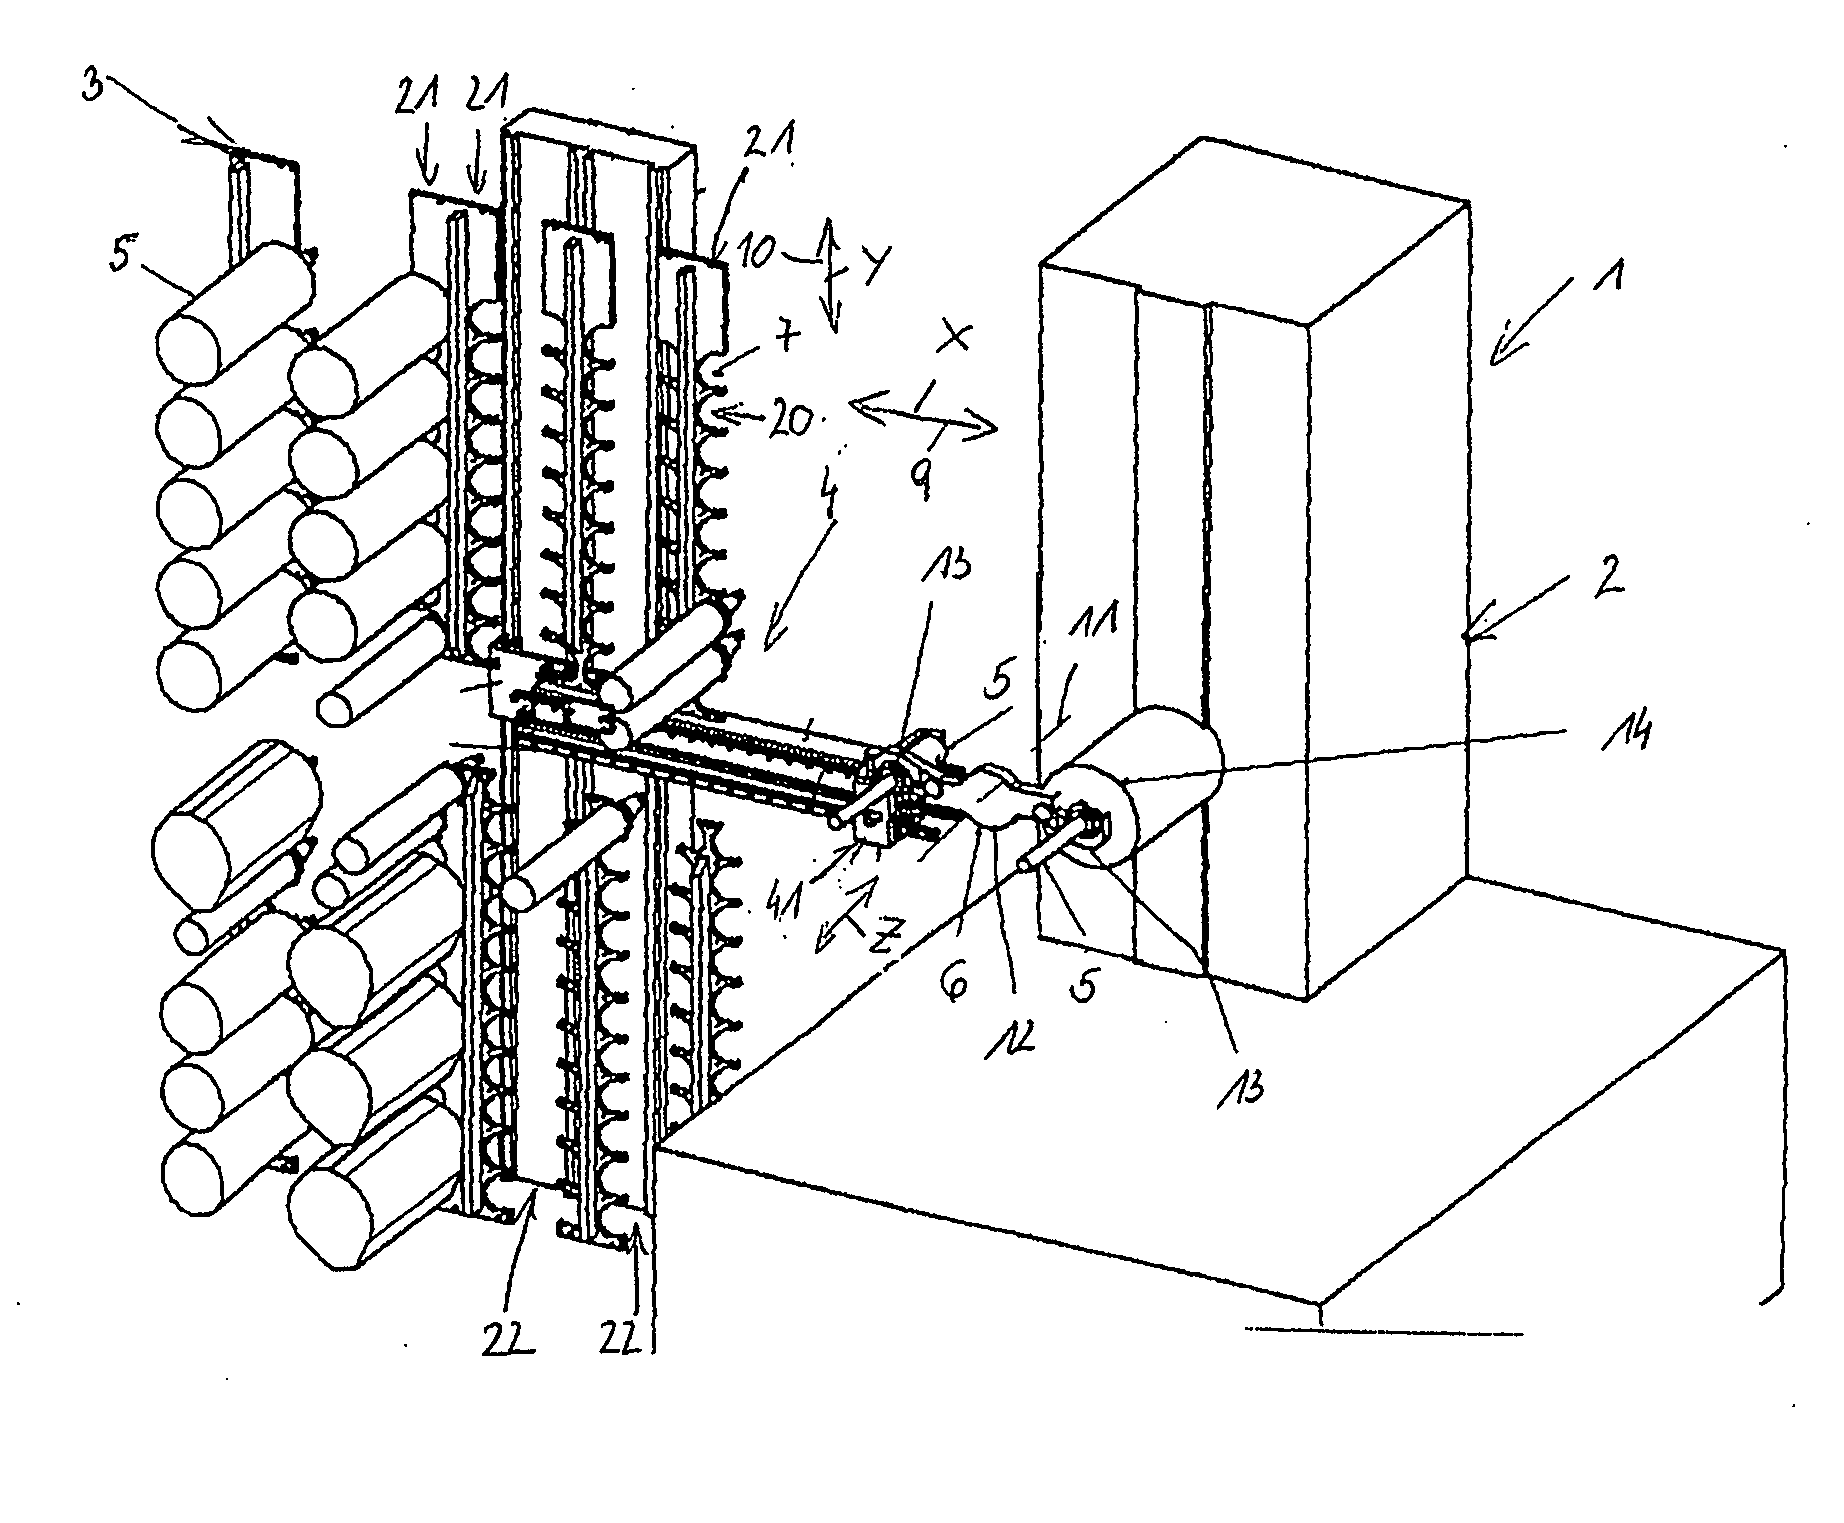 Method for loading and unloading of a machine tool with tools